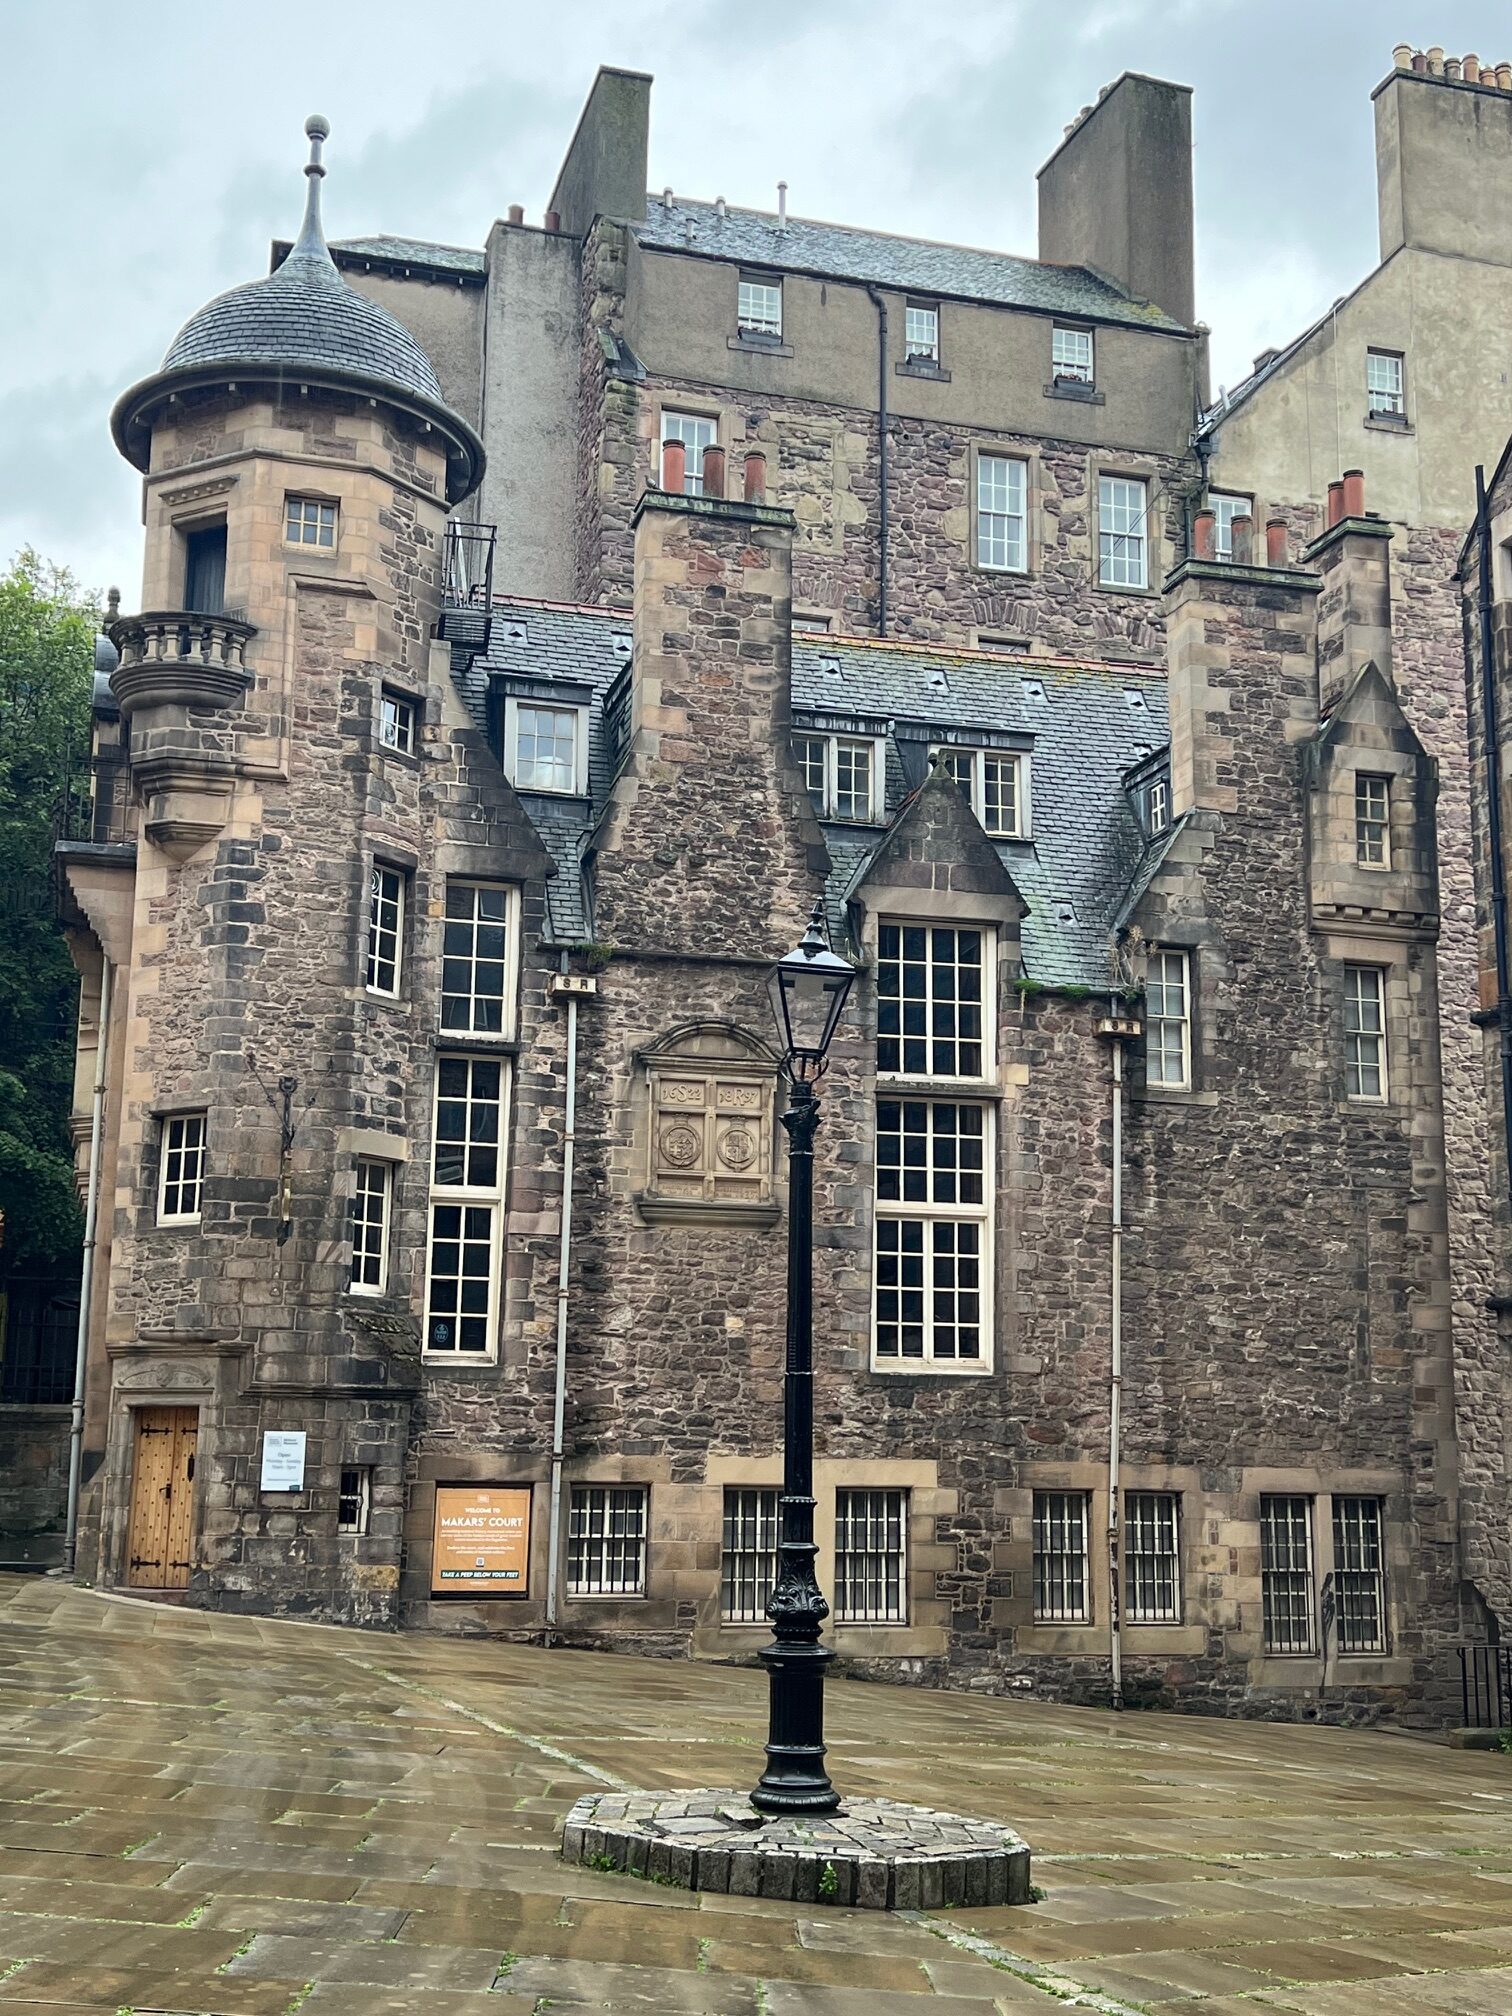 The stone exterior of the writers museum in Edinburgh